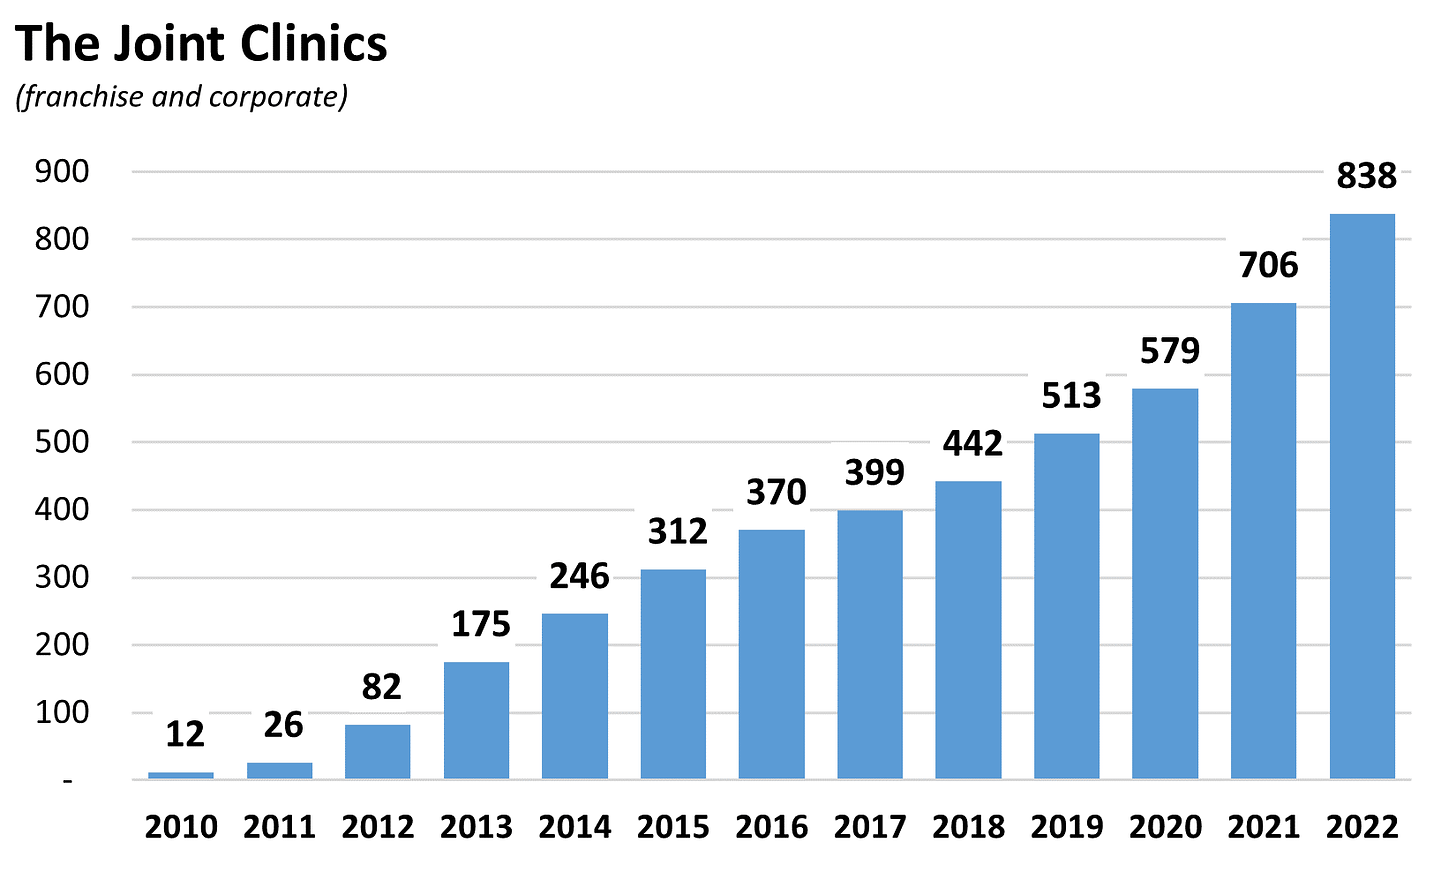 The Joint Number of Clinics